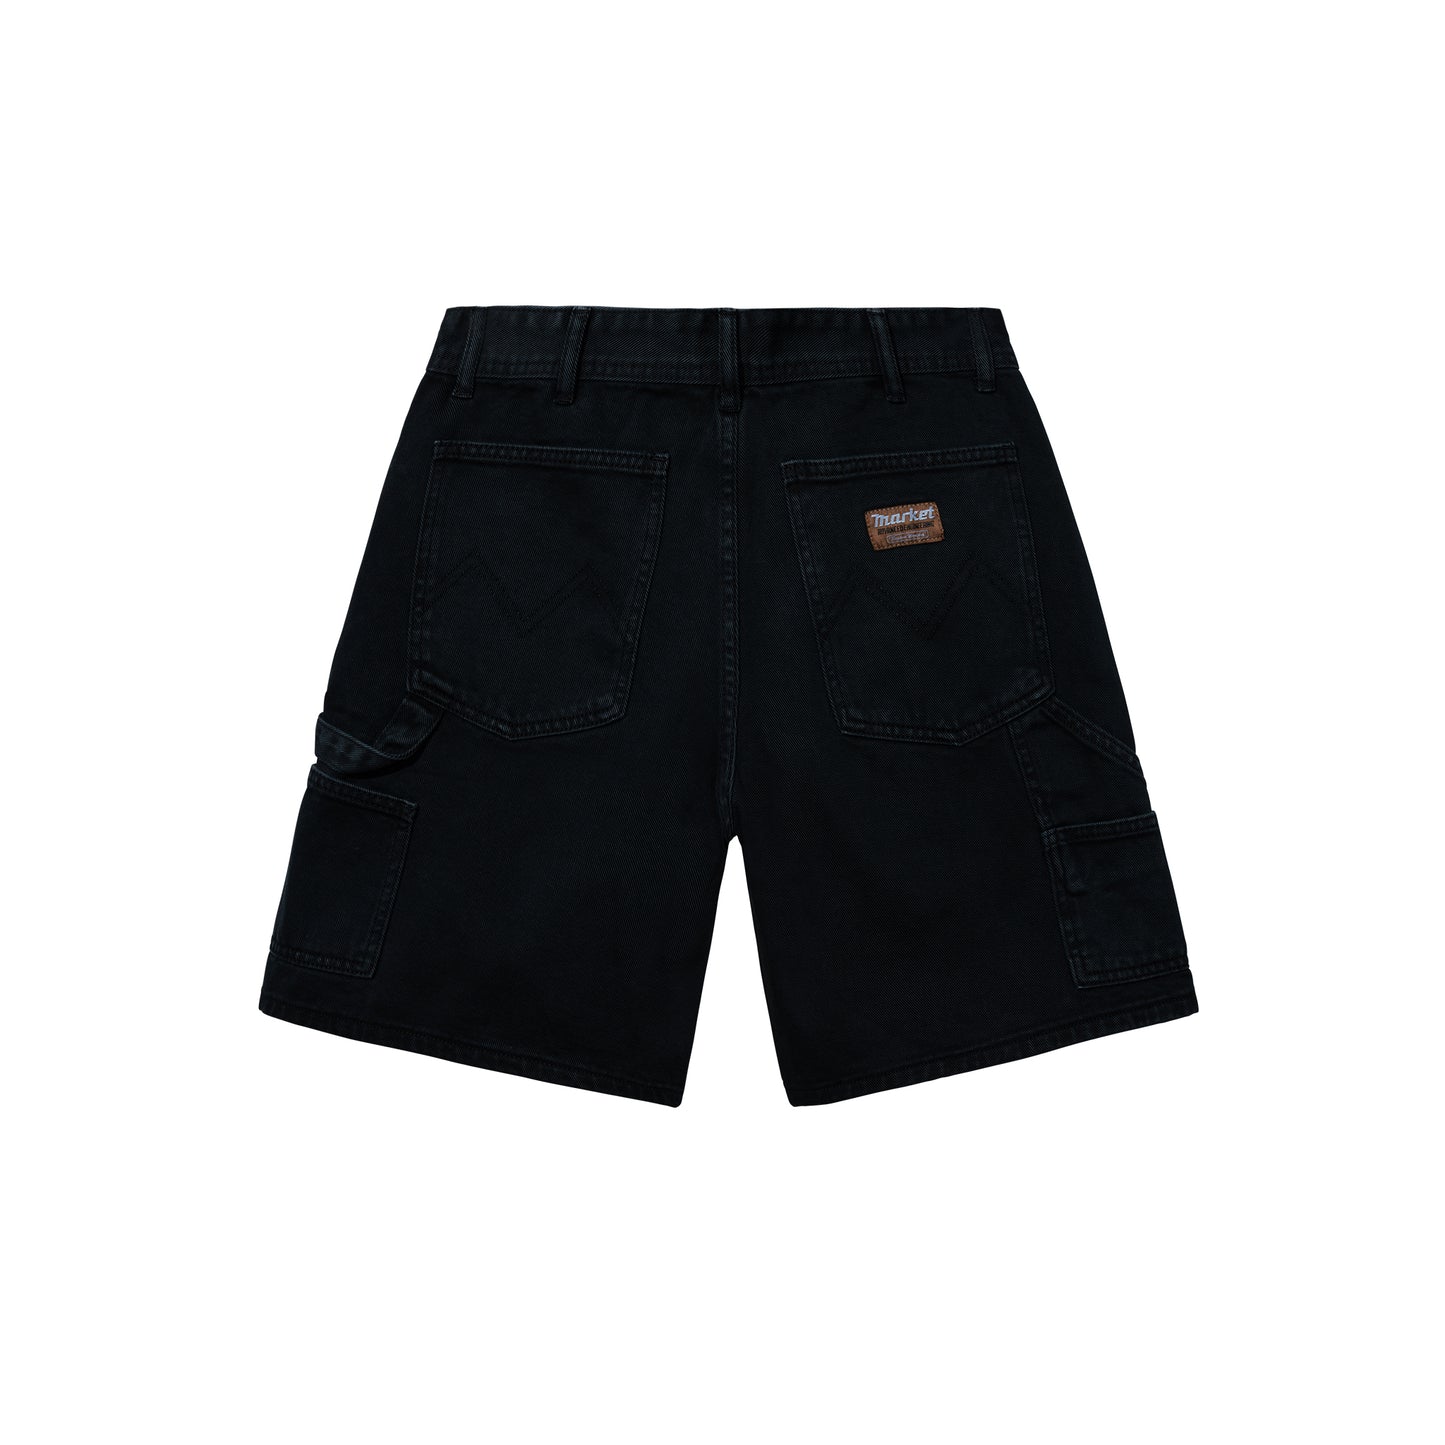 MARKET clothing brand HARDWARE CARPENTER SHORTS. Find more graphic tees, sweatpants, shorts and more bottoms at MarketStudios.com. Formally Chinatown Market. 